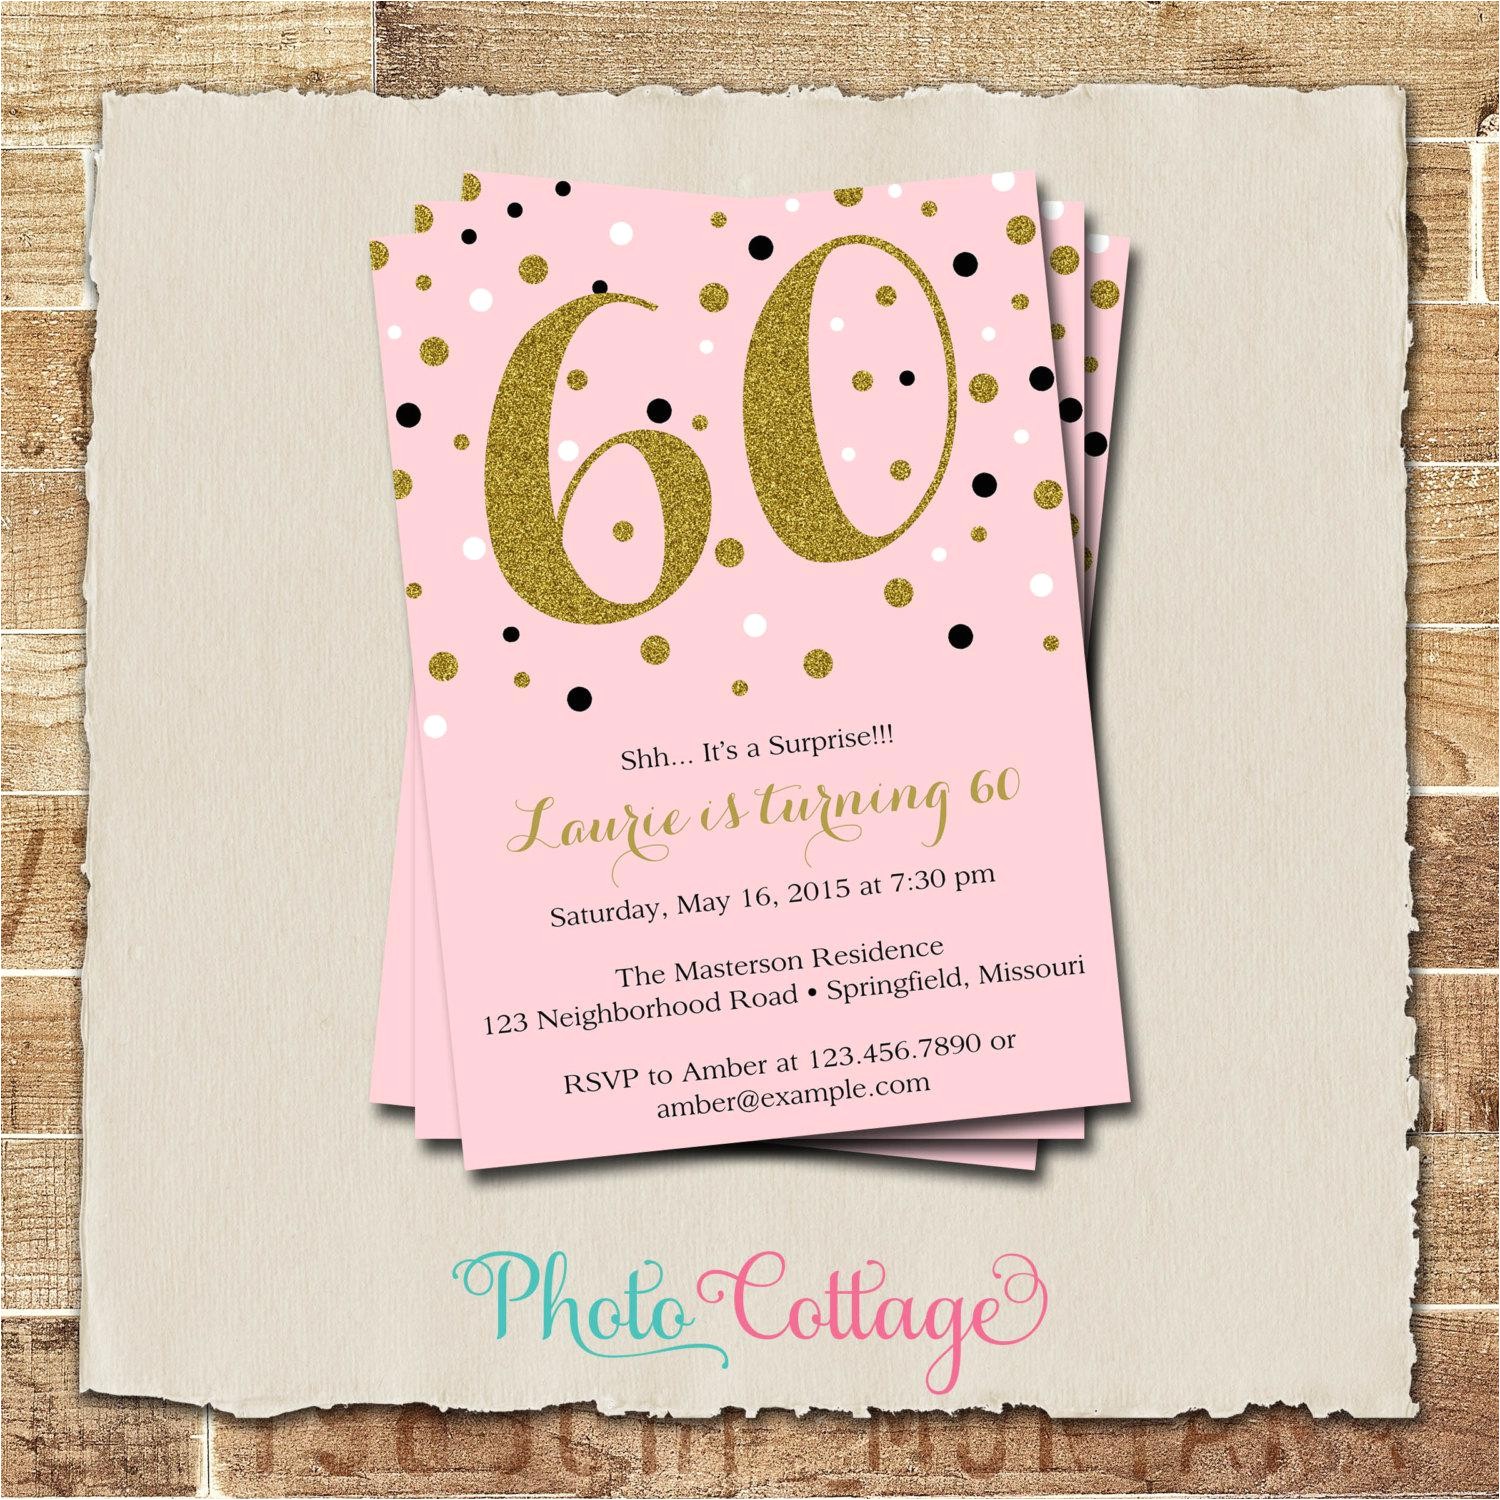 Picture Invitations for Birthday 60th Birthday Party Invitations Party Invitations Templates